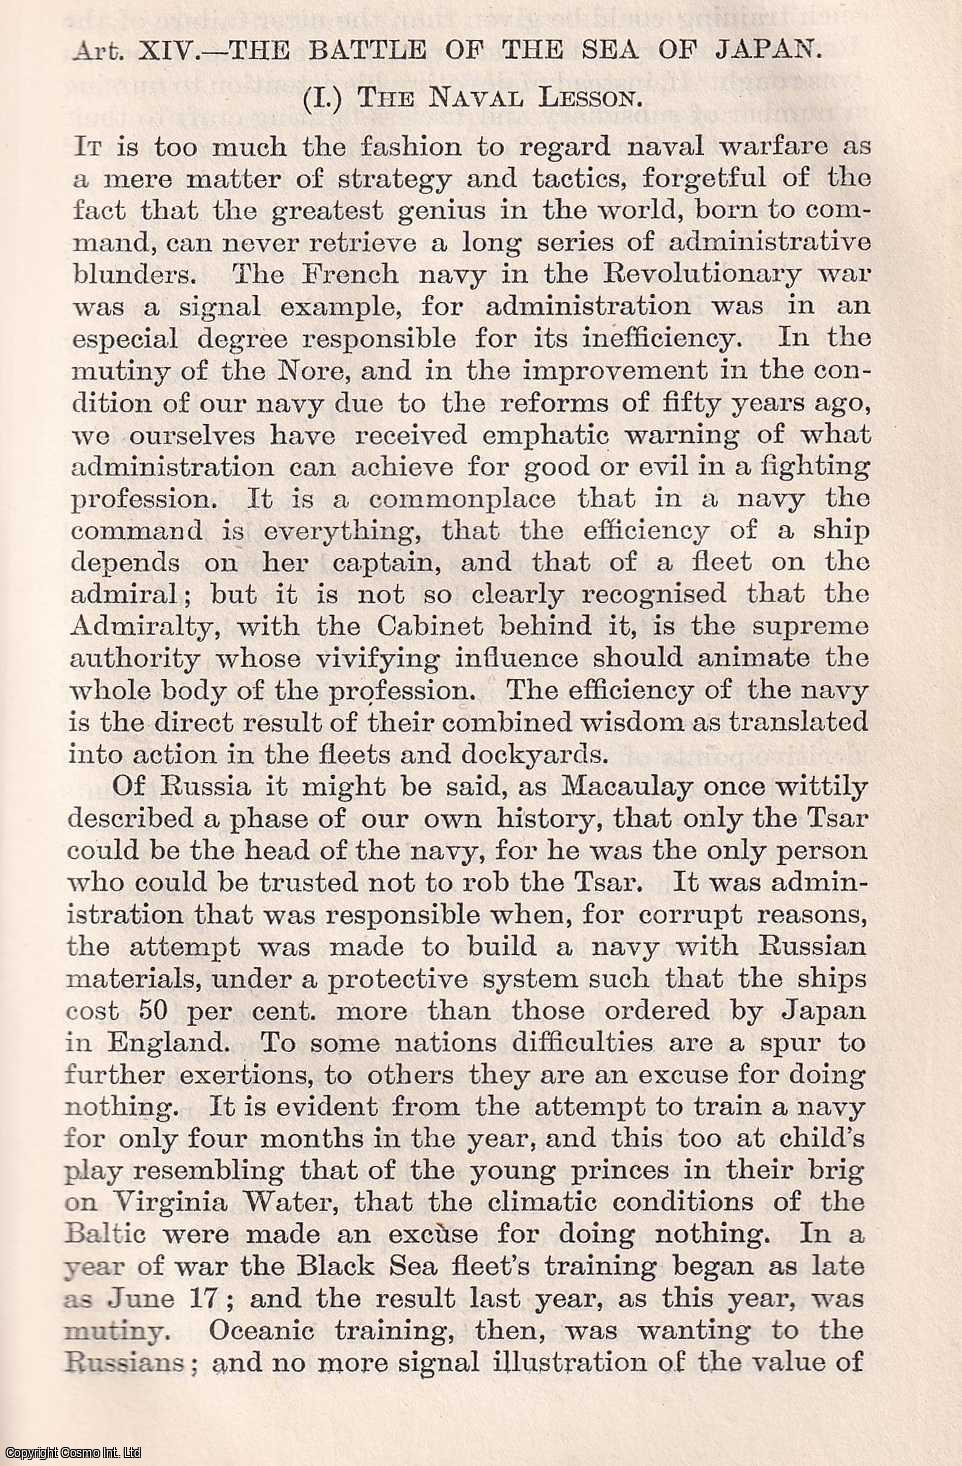 The Quarterly Review - The Battle of The Sea of Japan. An uncommon original article from The Quarterly Review, 1905.